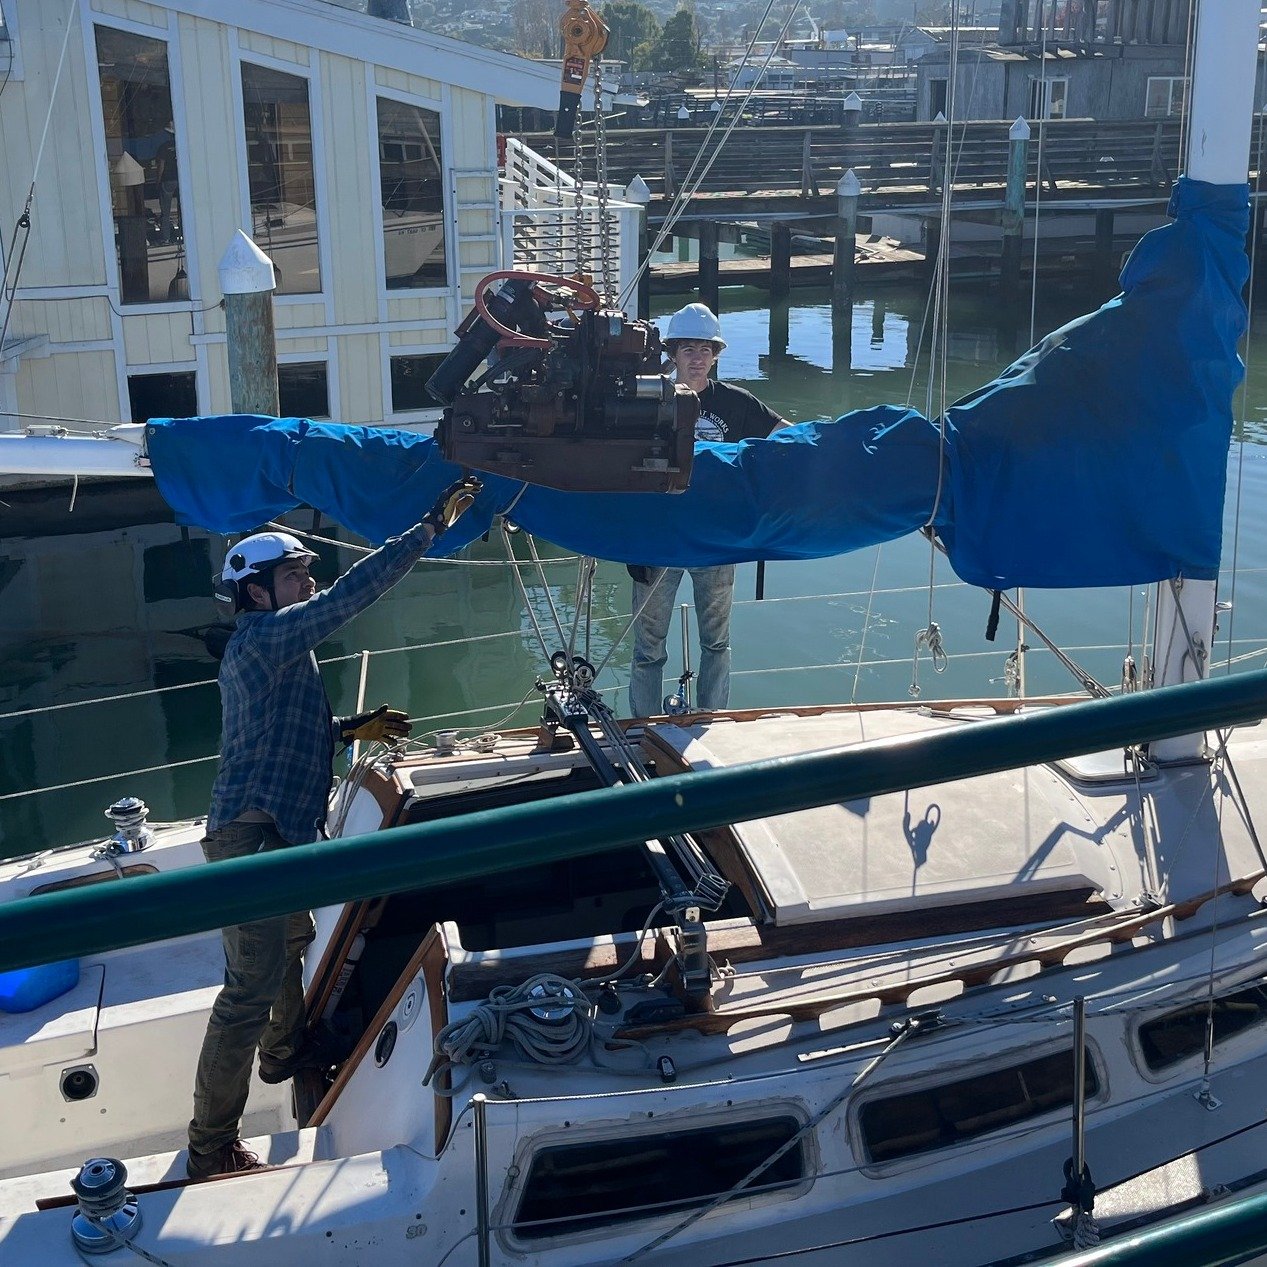 We are finishing the year strong at Spaulding Marine Center with the completion of our first electric propulsion conversion!

Mike Gunning, from Electric Yacht out of Laguna Beach, shares &quot;We have confidence in the Spaulding Marine Center to ins